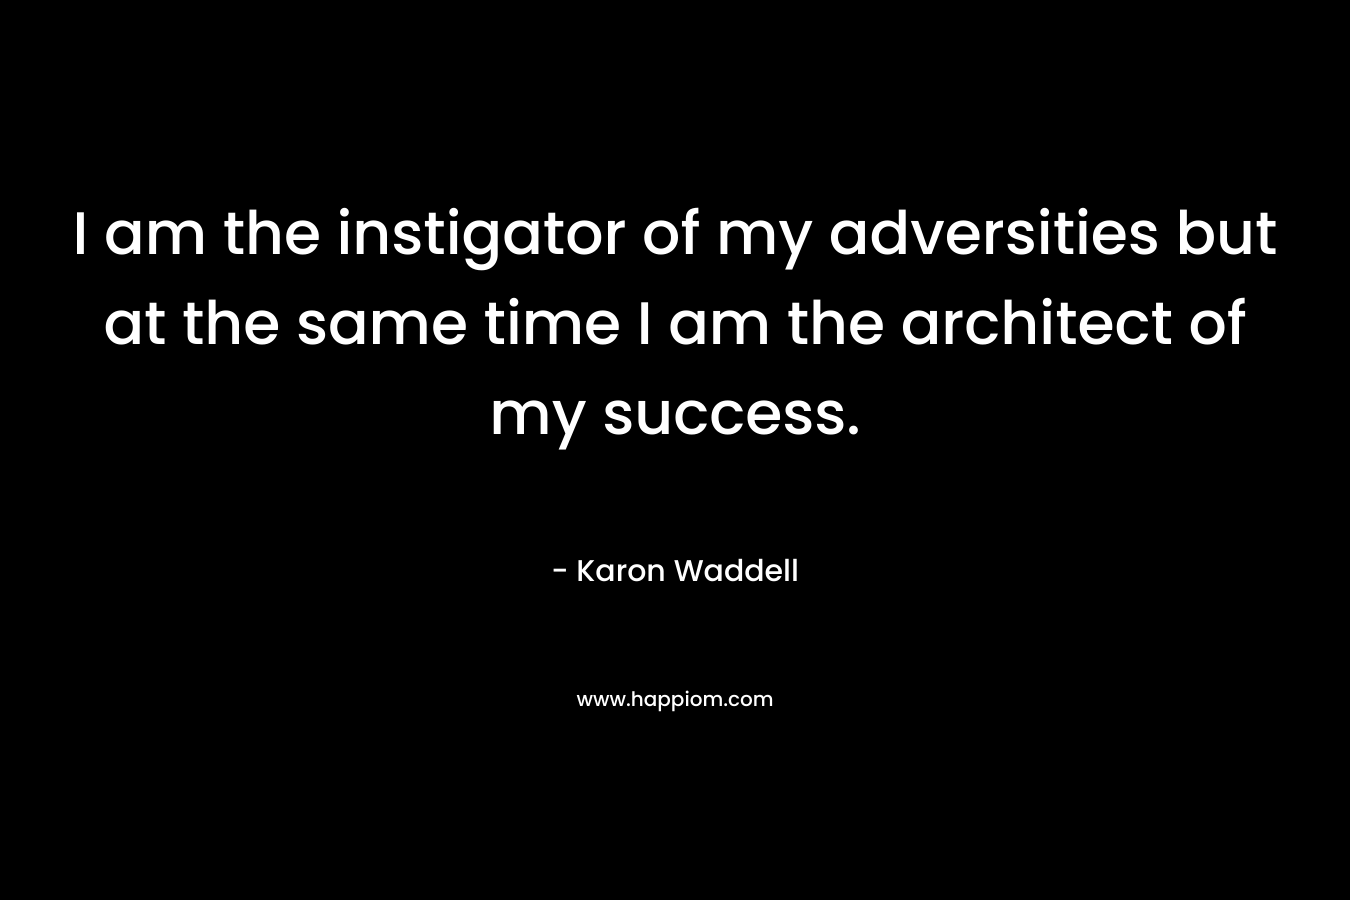 I am the instigator of my adversities but at the same time I am the architect of my success. – Karon Waddell